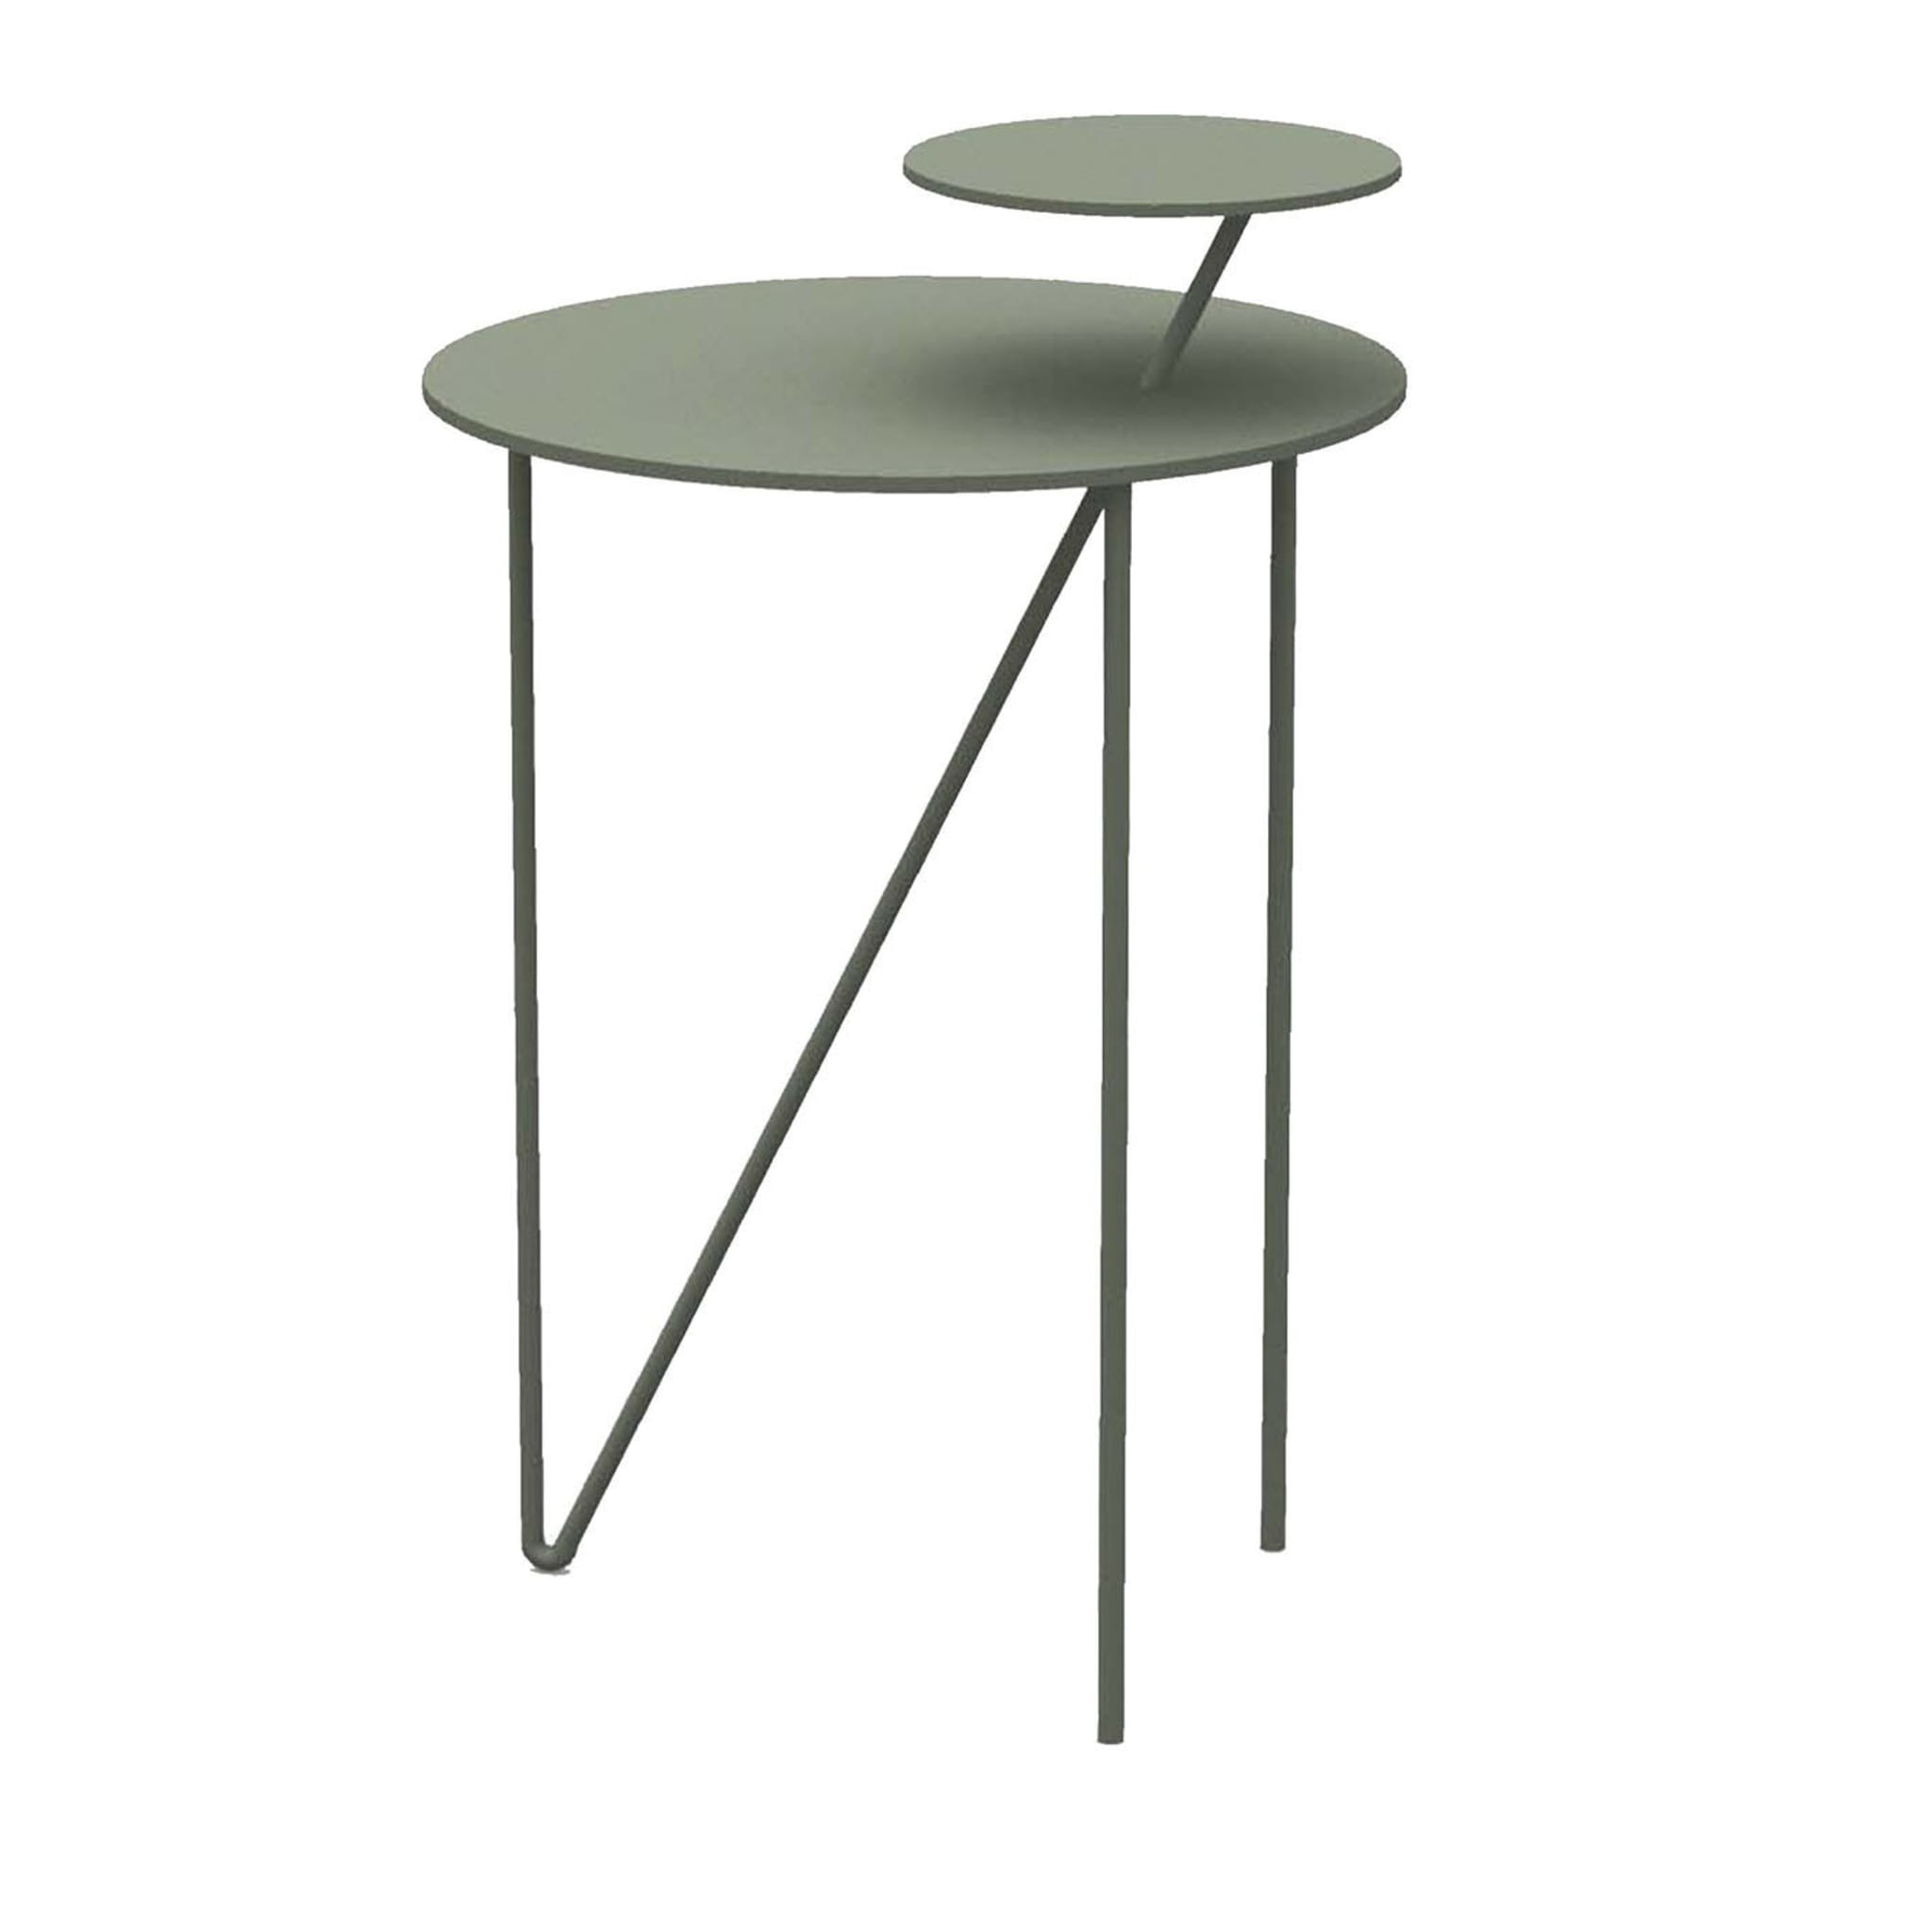 Passante Tall Sage Green Coffee Table - Main view